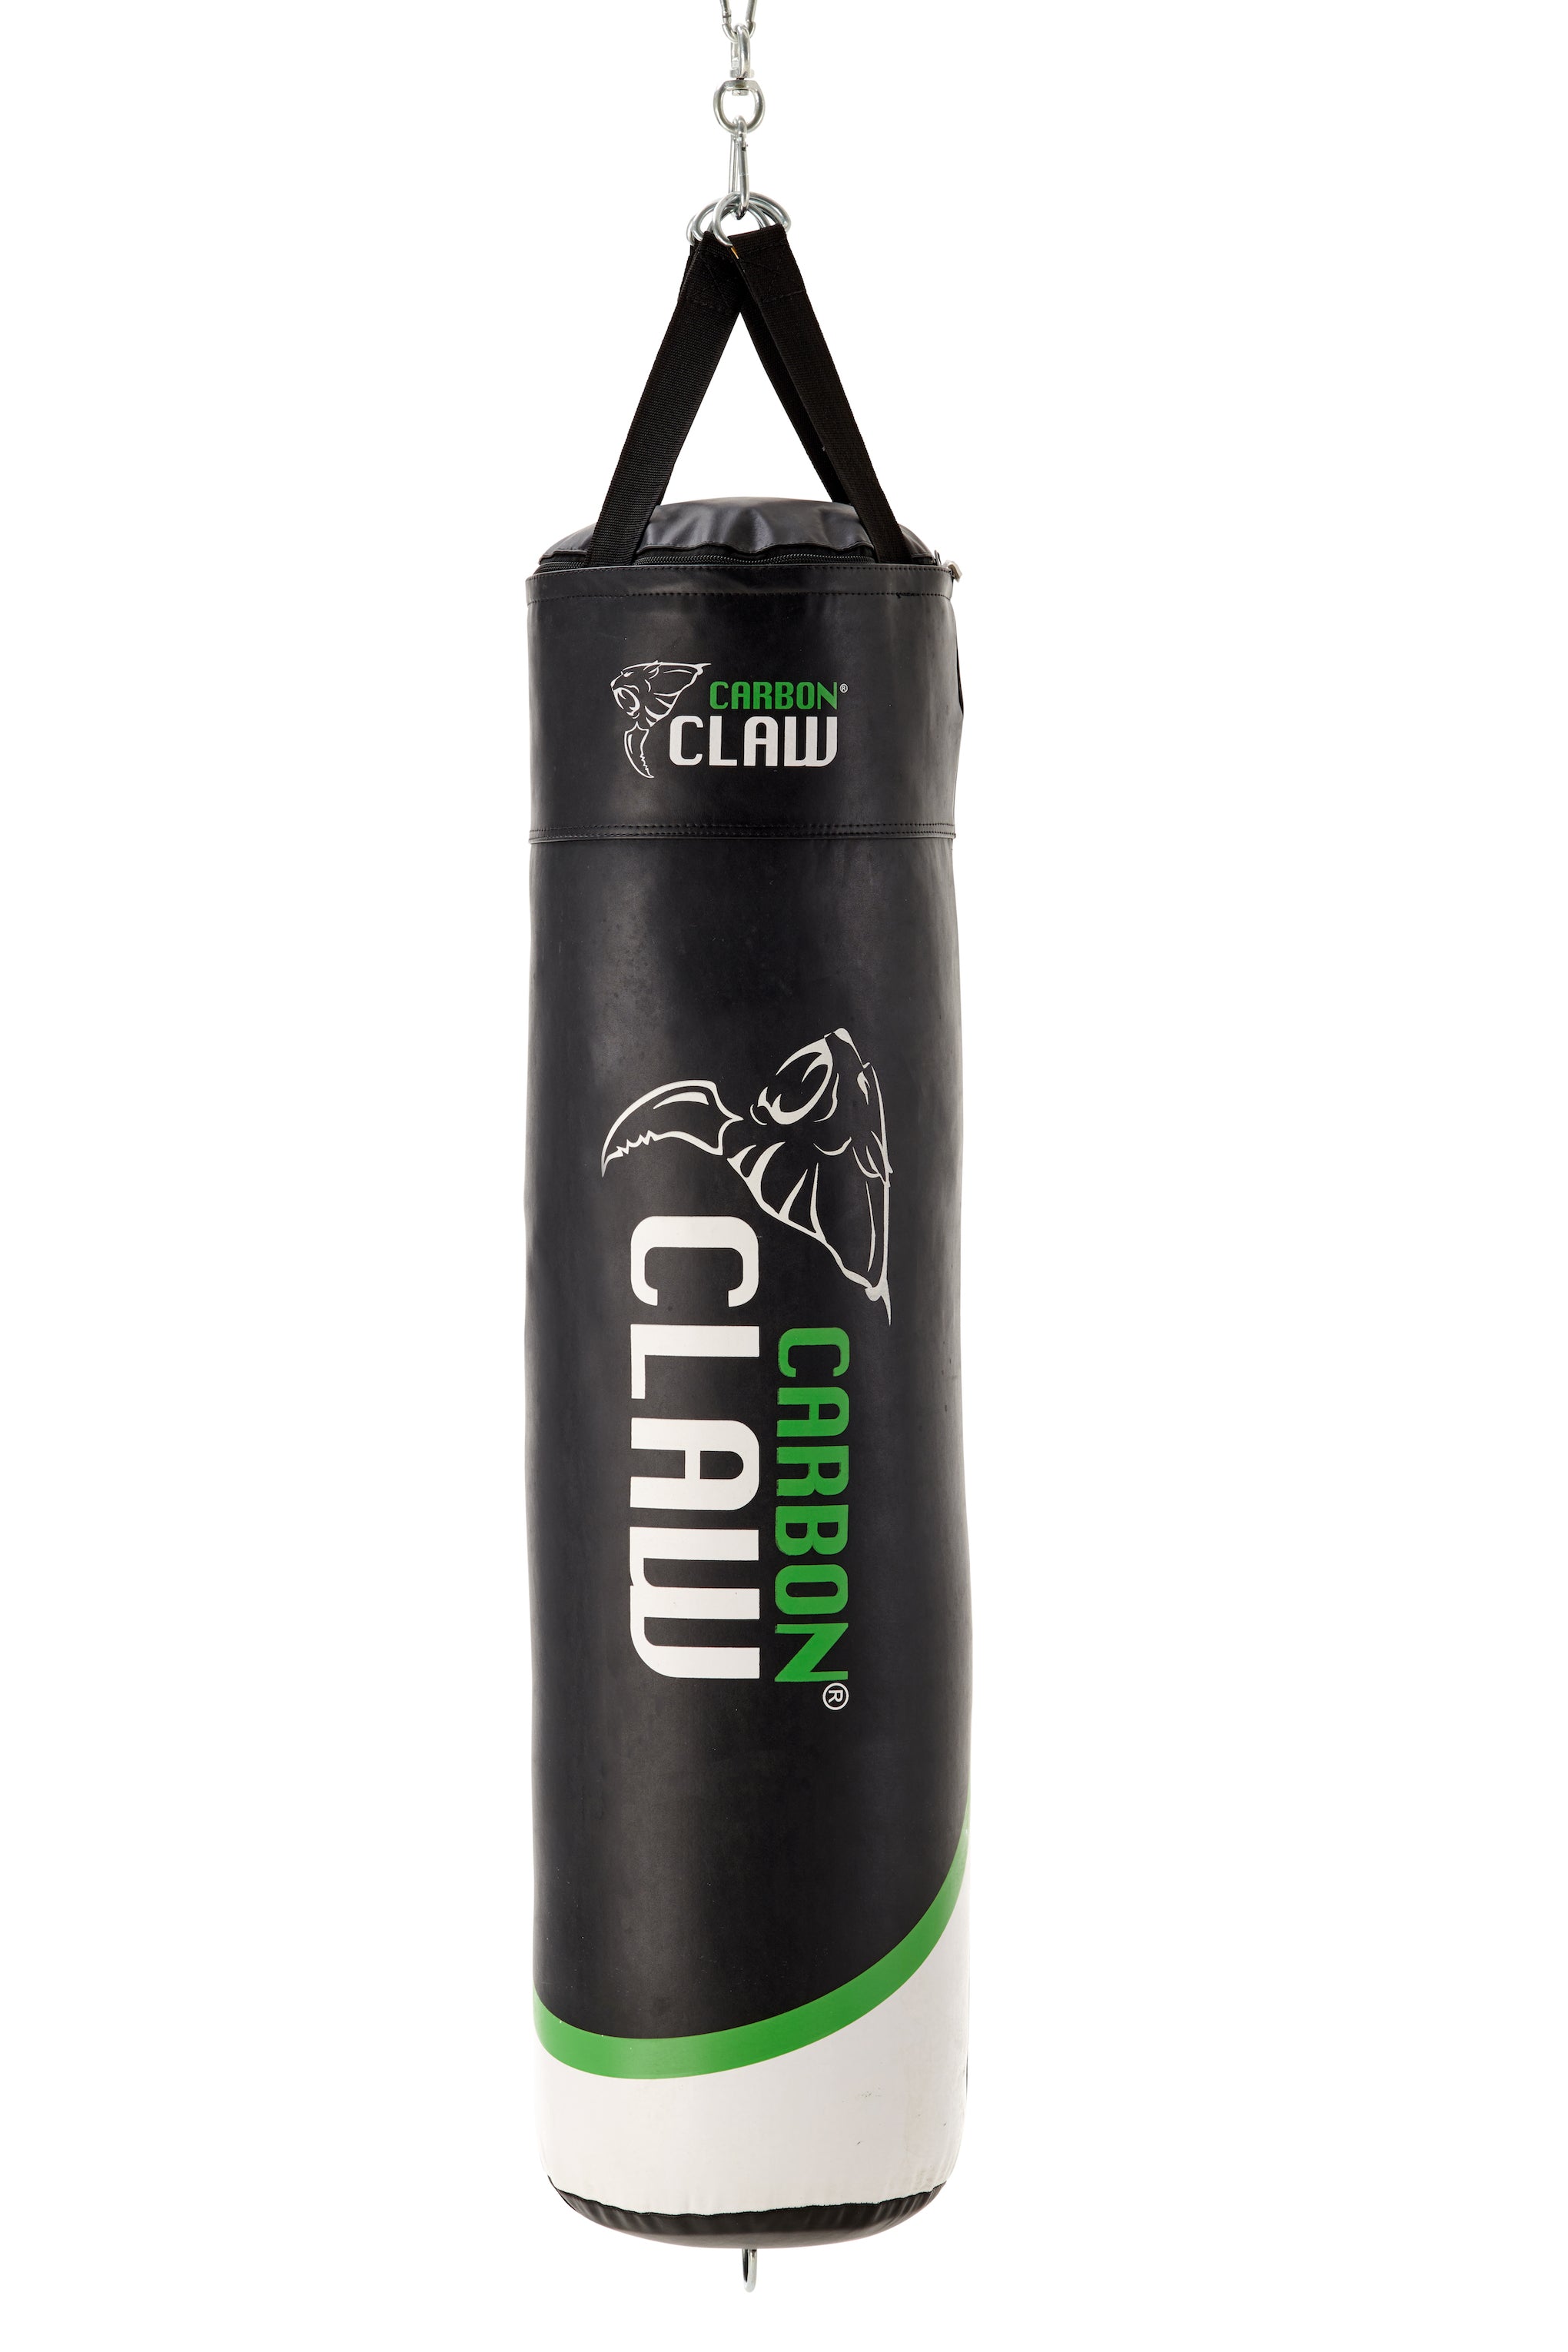 Carbon Claw Arma Ax-5 Series 4ft Punch Bag 27kg